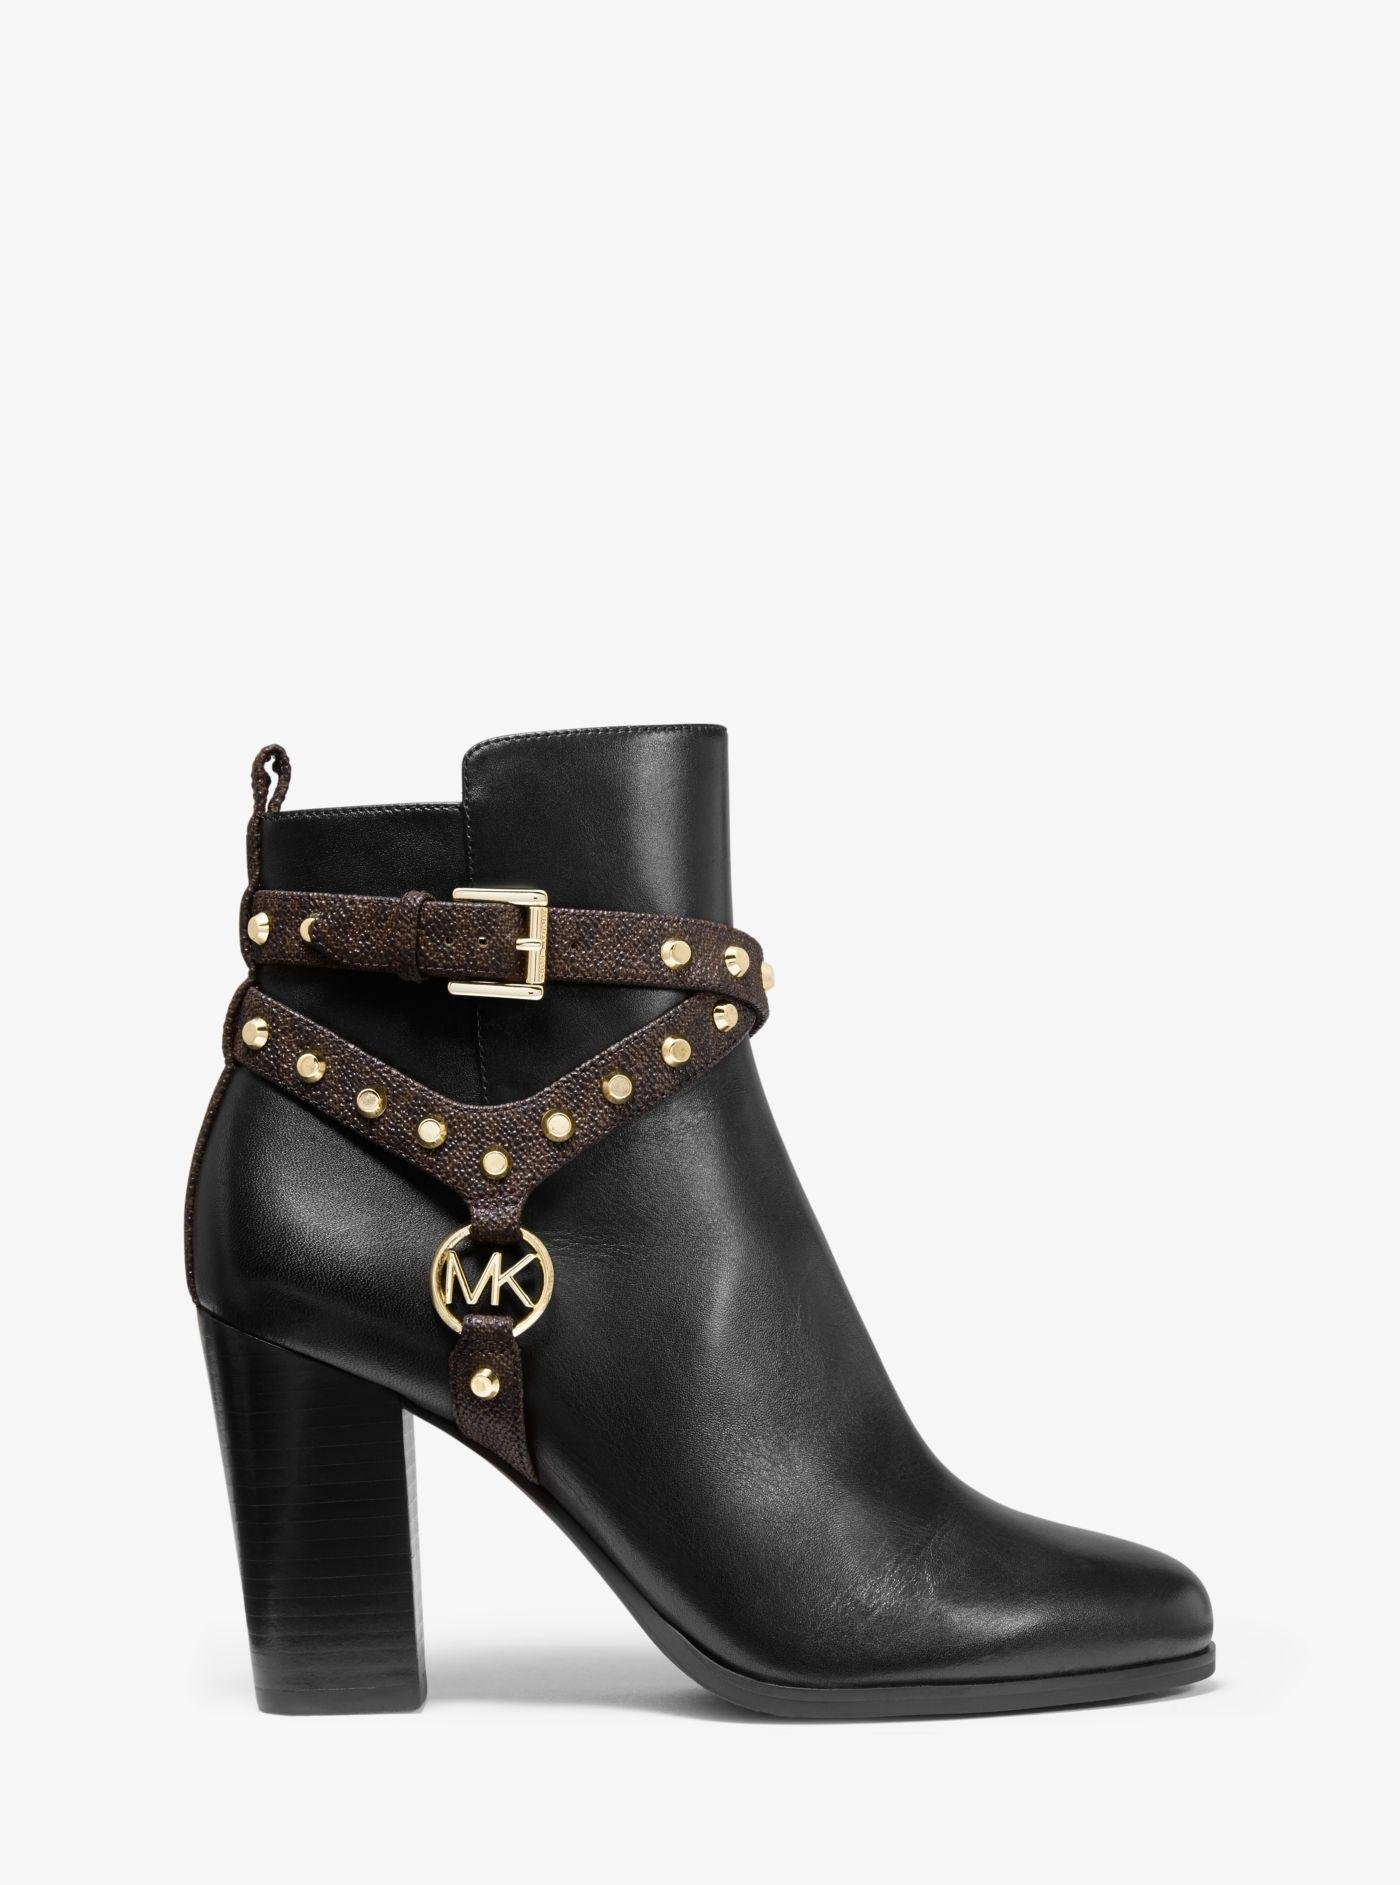 Michael Kors Preston Studded Leather Ankle Boot in Black - Lyst